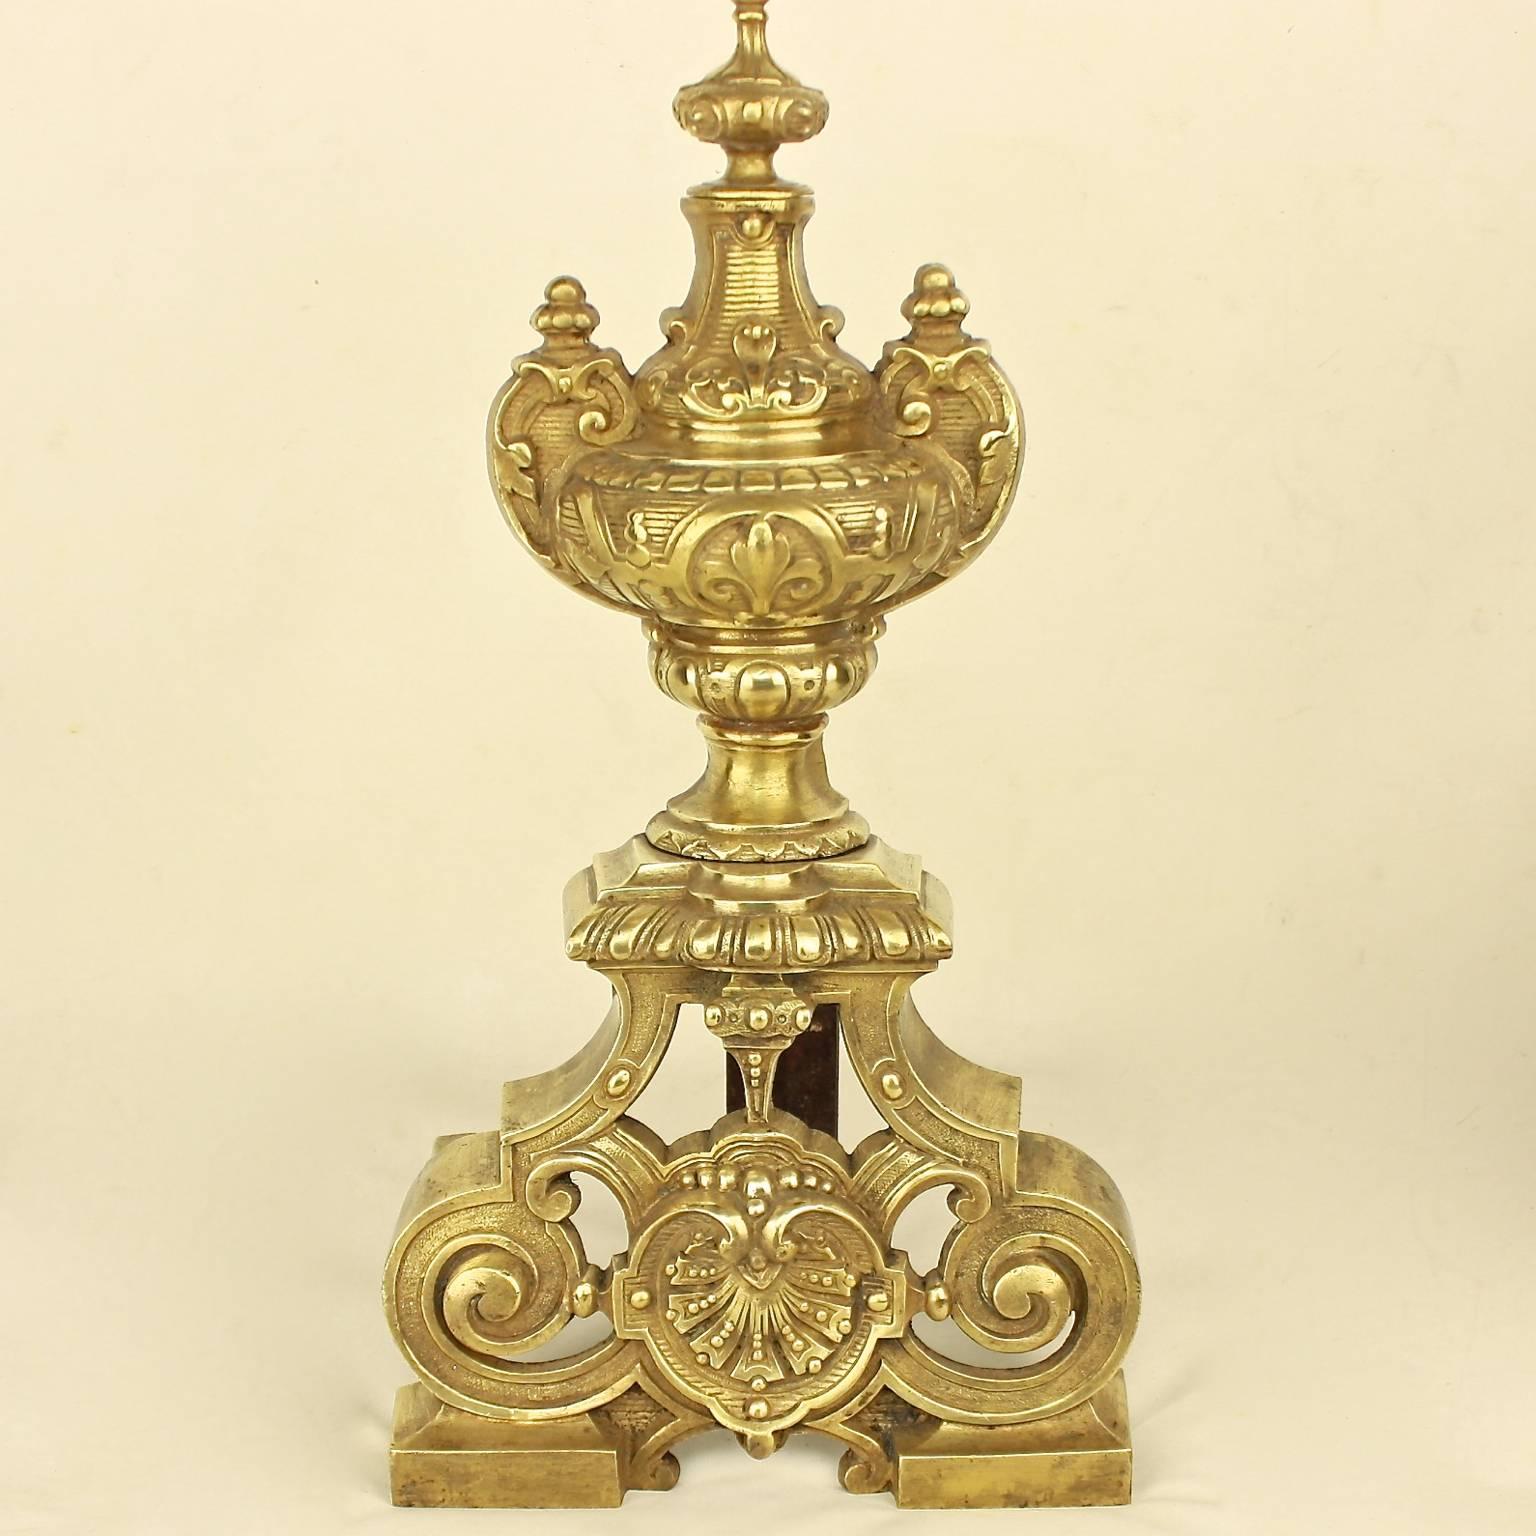 19th Century/Napoleon III Pair of Louis XIV Style Vase Motif Bronze Andirons or Fire Dogs

A pair of Louis XIV style late 19th century baluster shaped brass French andirons or so-called chenets each decorated with acanthus wrapped urns with foliate